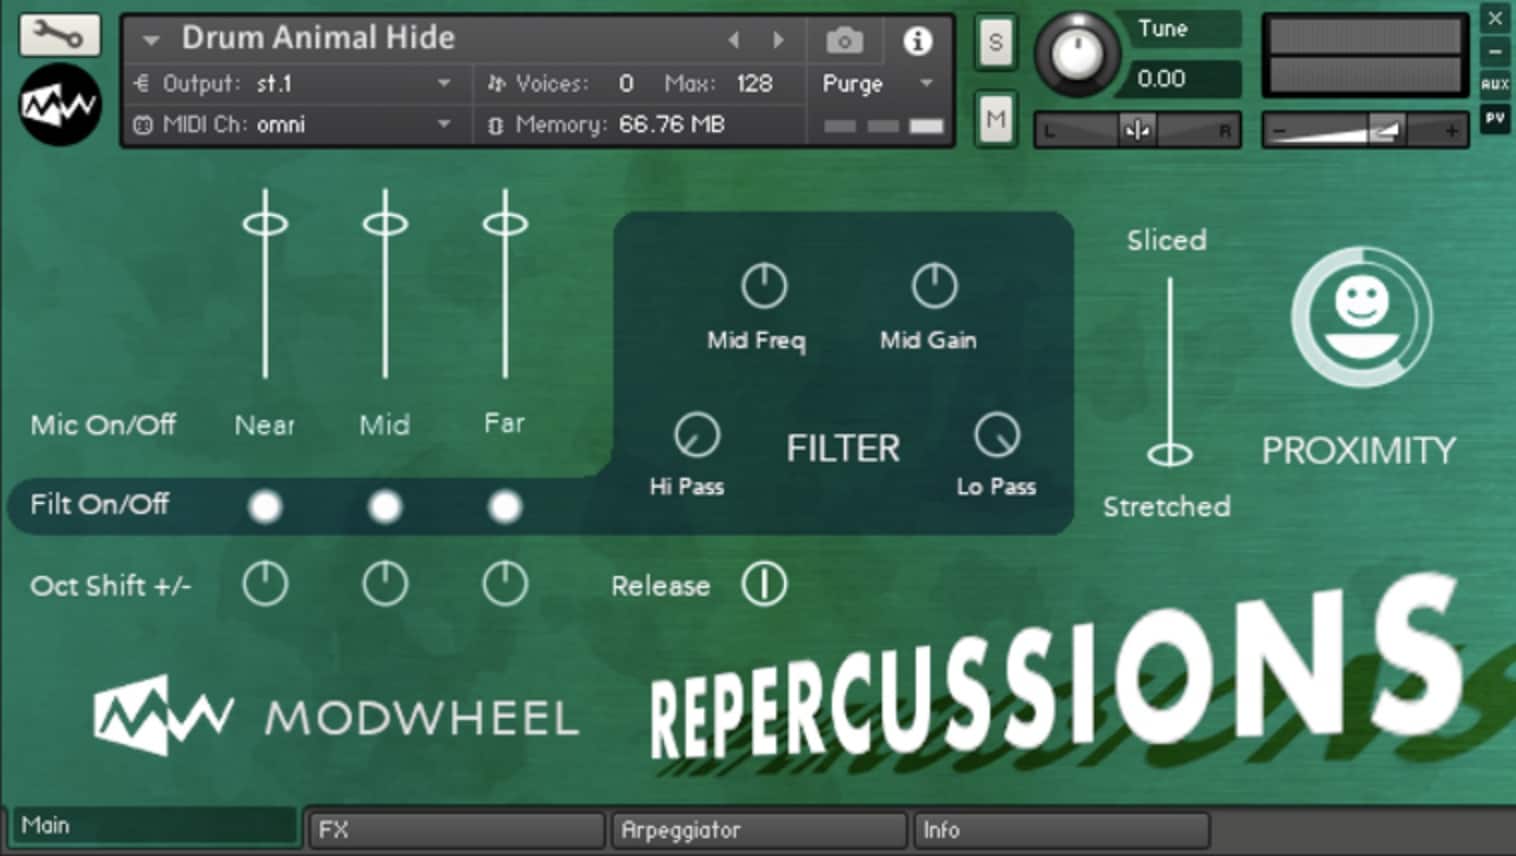 Get Excited for Modwheels Launch of REPERCUSSIONS Kontakt Percussive Instruments and More UI